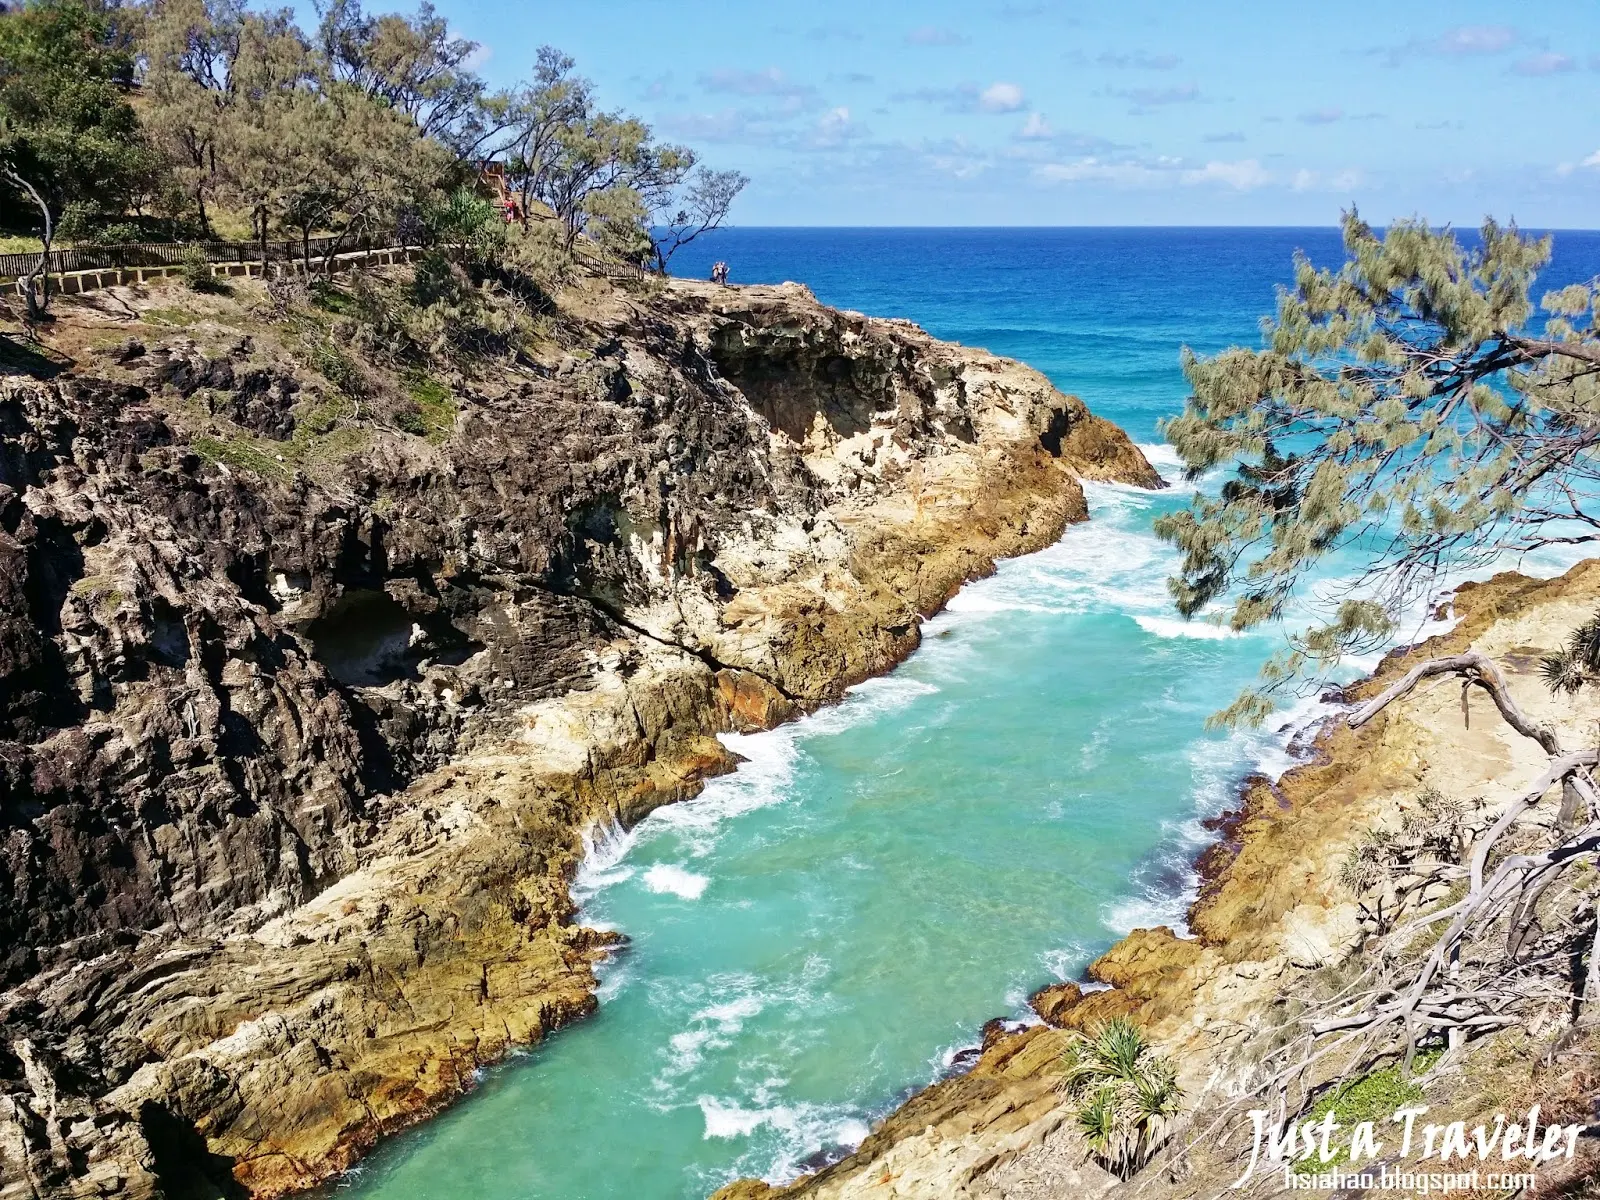 Brisbane-attraction-best-top-North-Stradbroke-Island-ferry-transport-tourist-spots-fun-things-to-do-recommendation-guide-Straddie